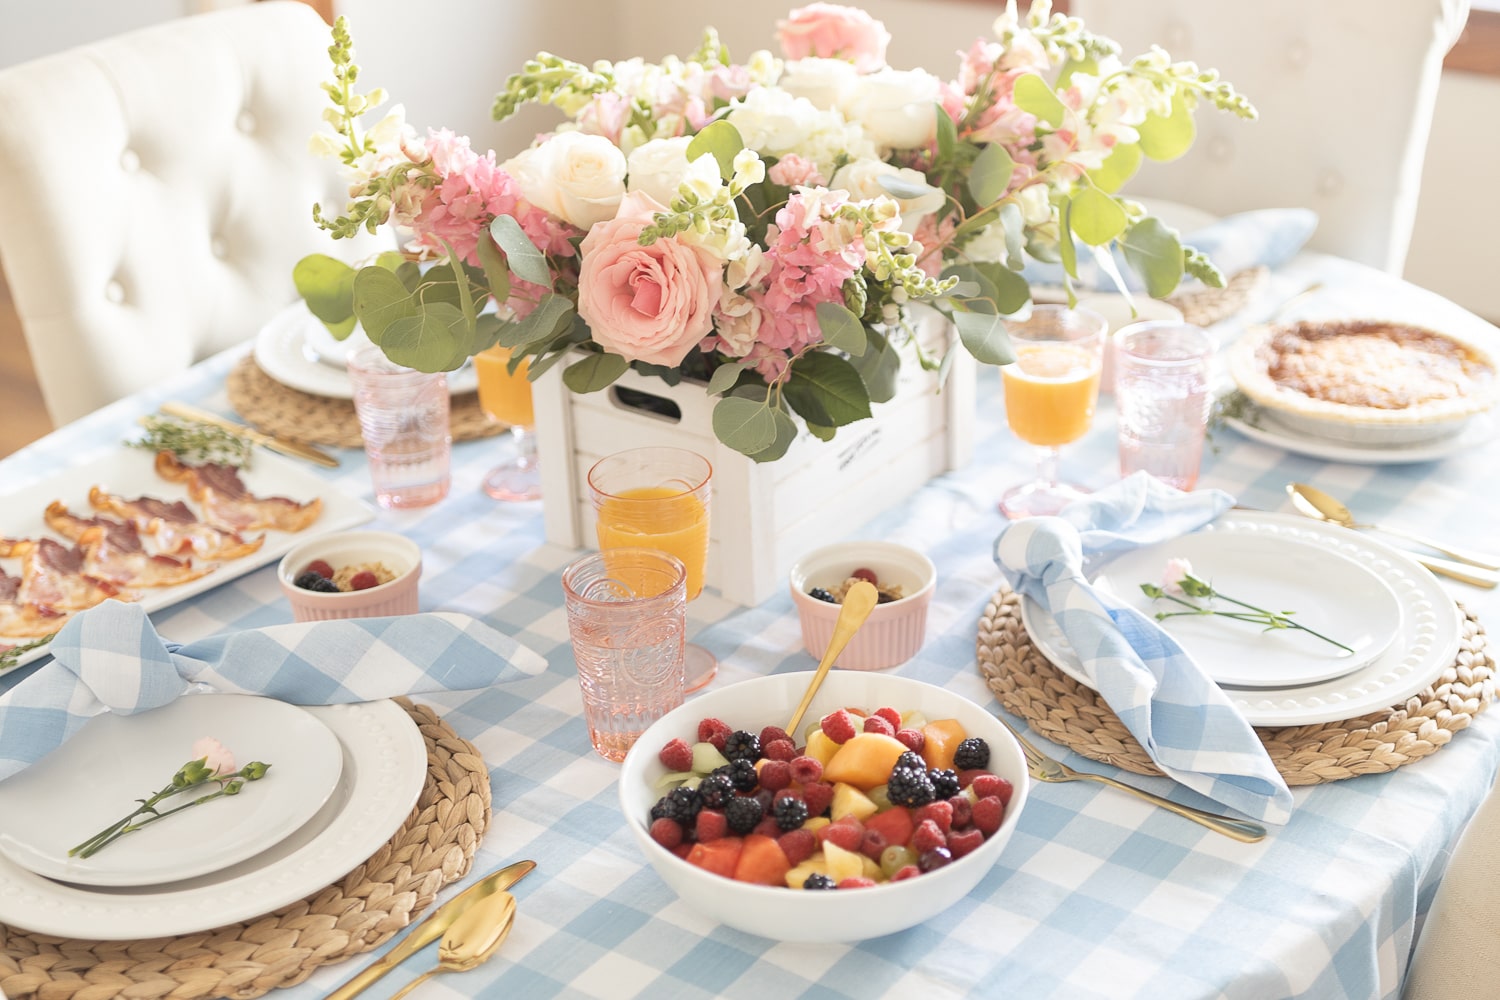 Mother’s day brunch table setting ideas by blogger Stephanie Ziajka on Diary of a Debutante